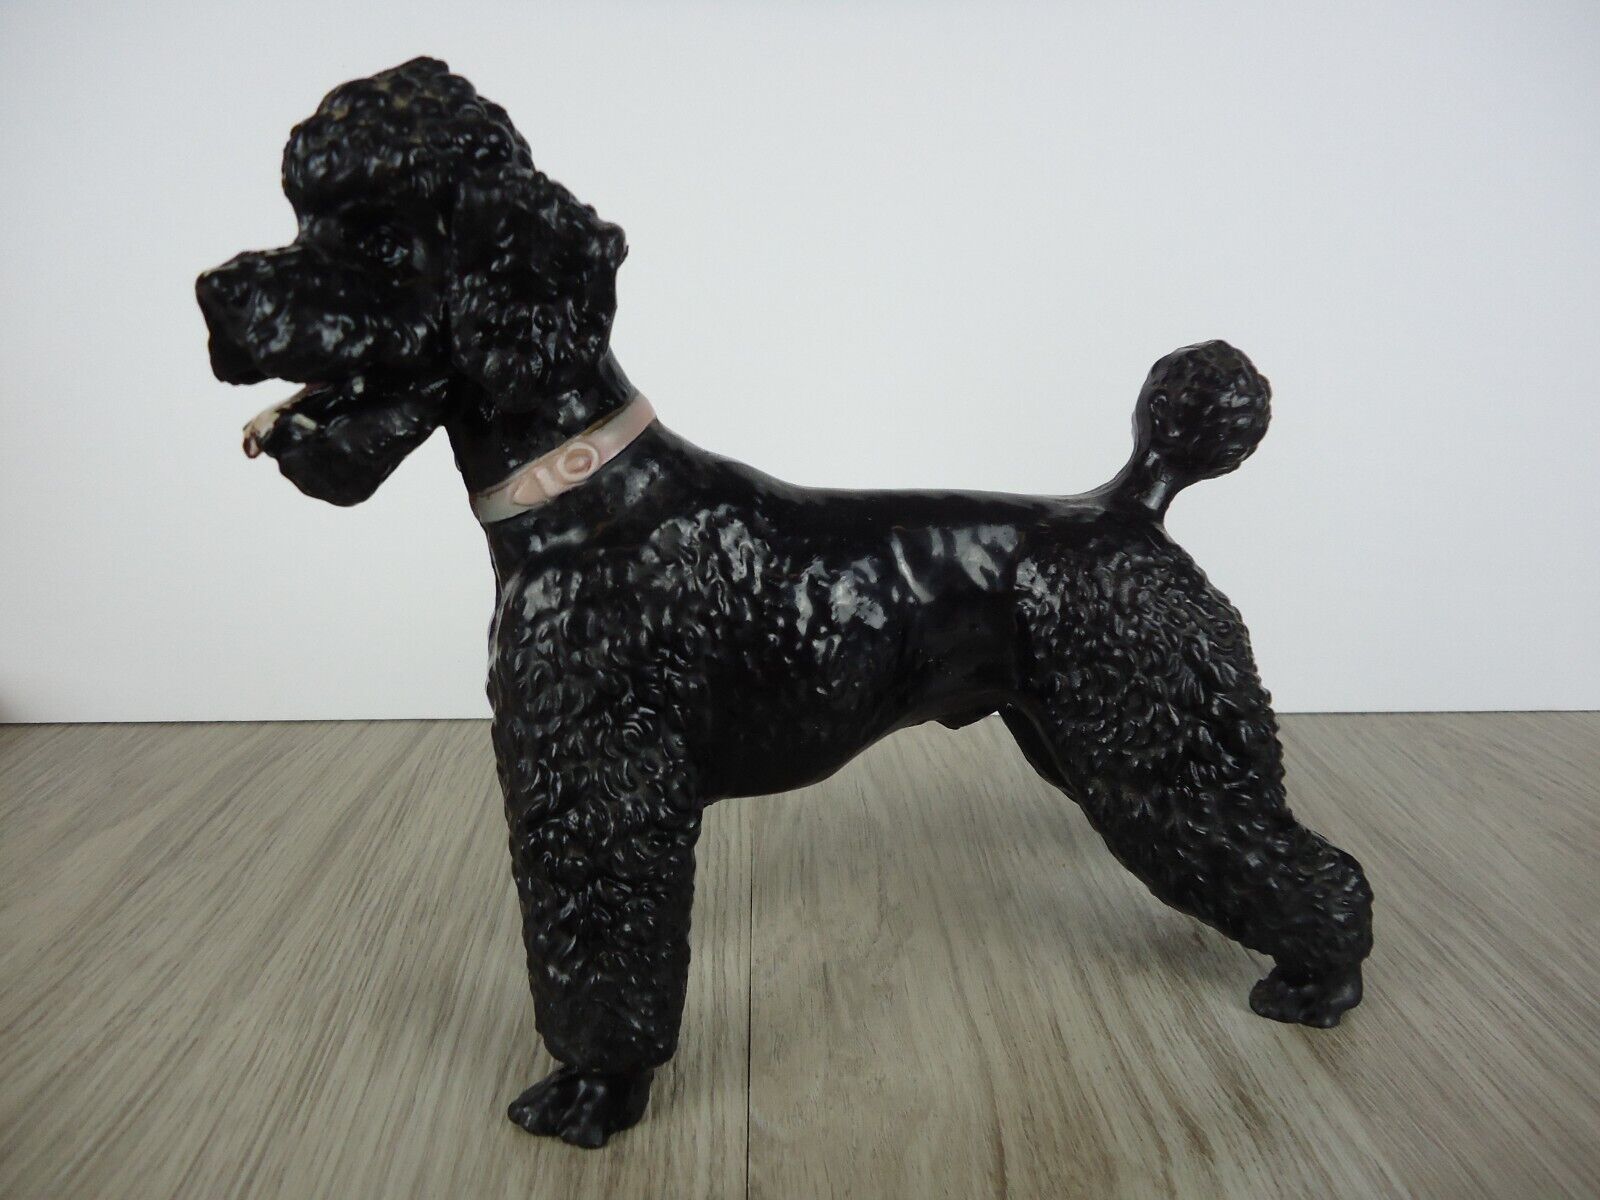 VTG Black Standard Poodle Dog Figurine Toy Collectible Red Collar 8 inch